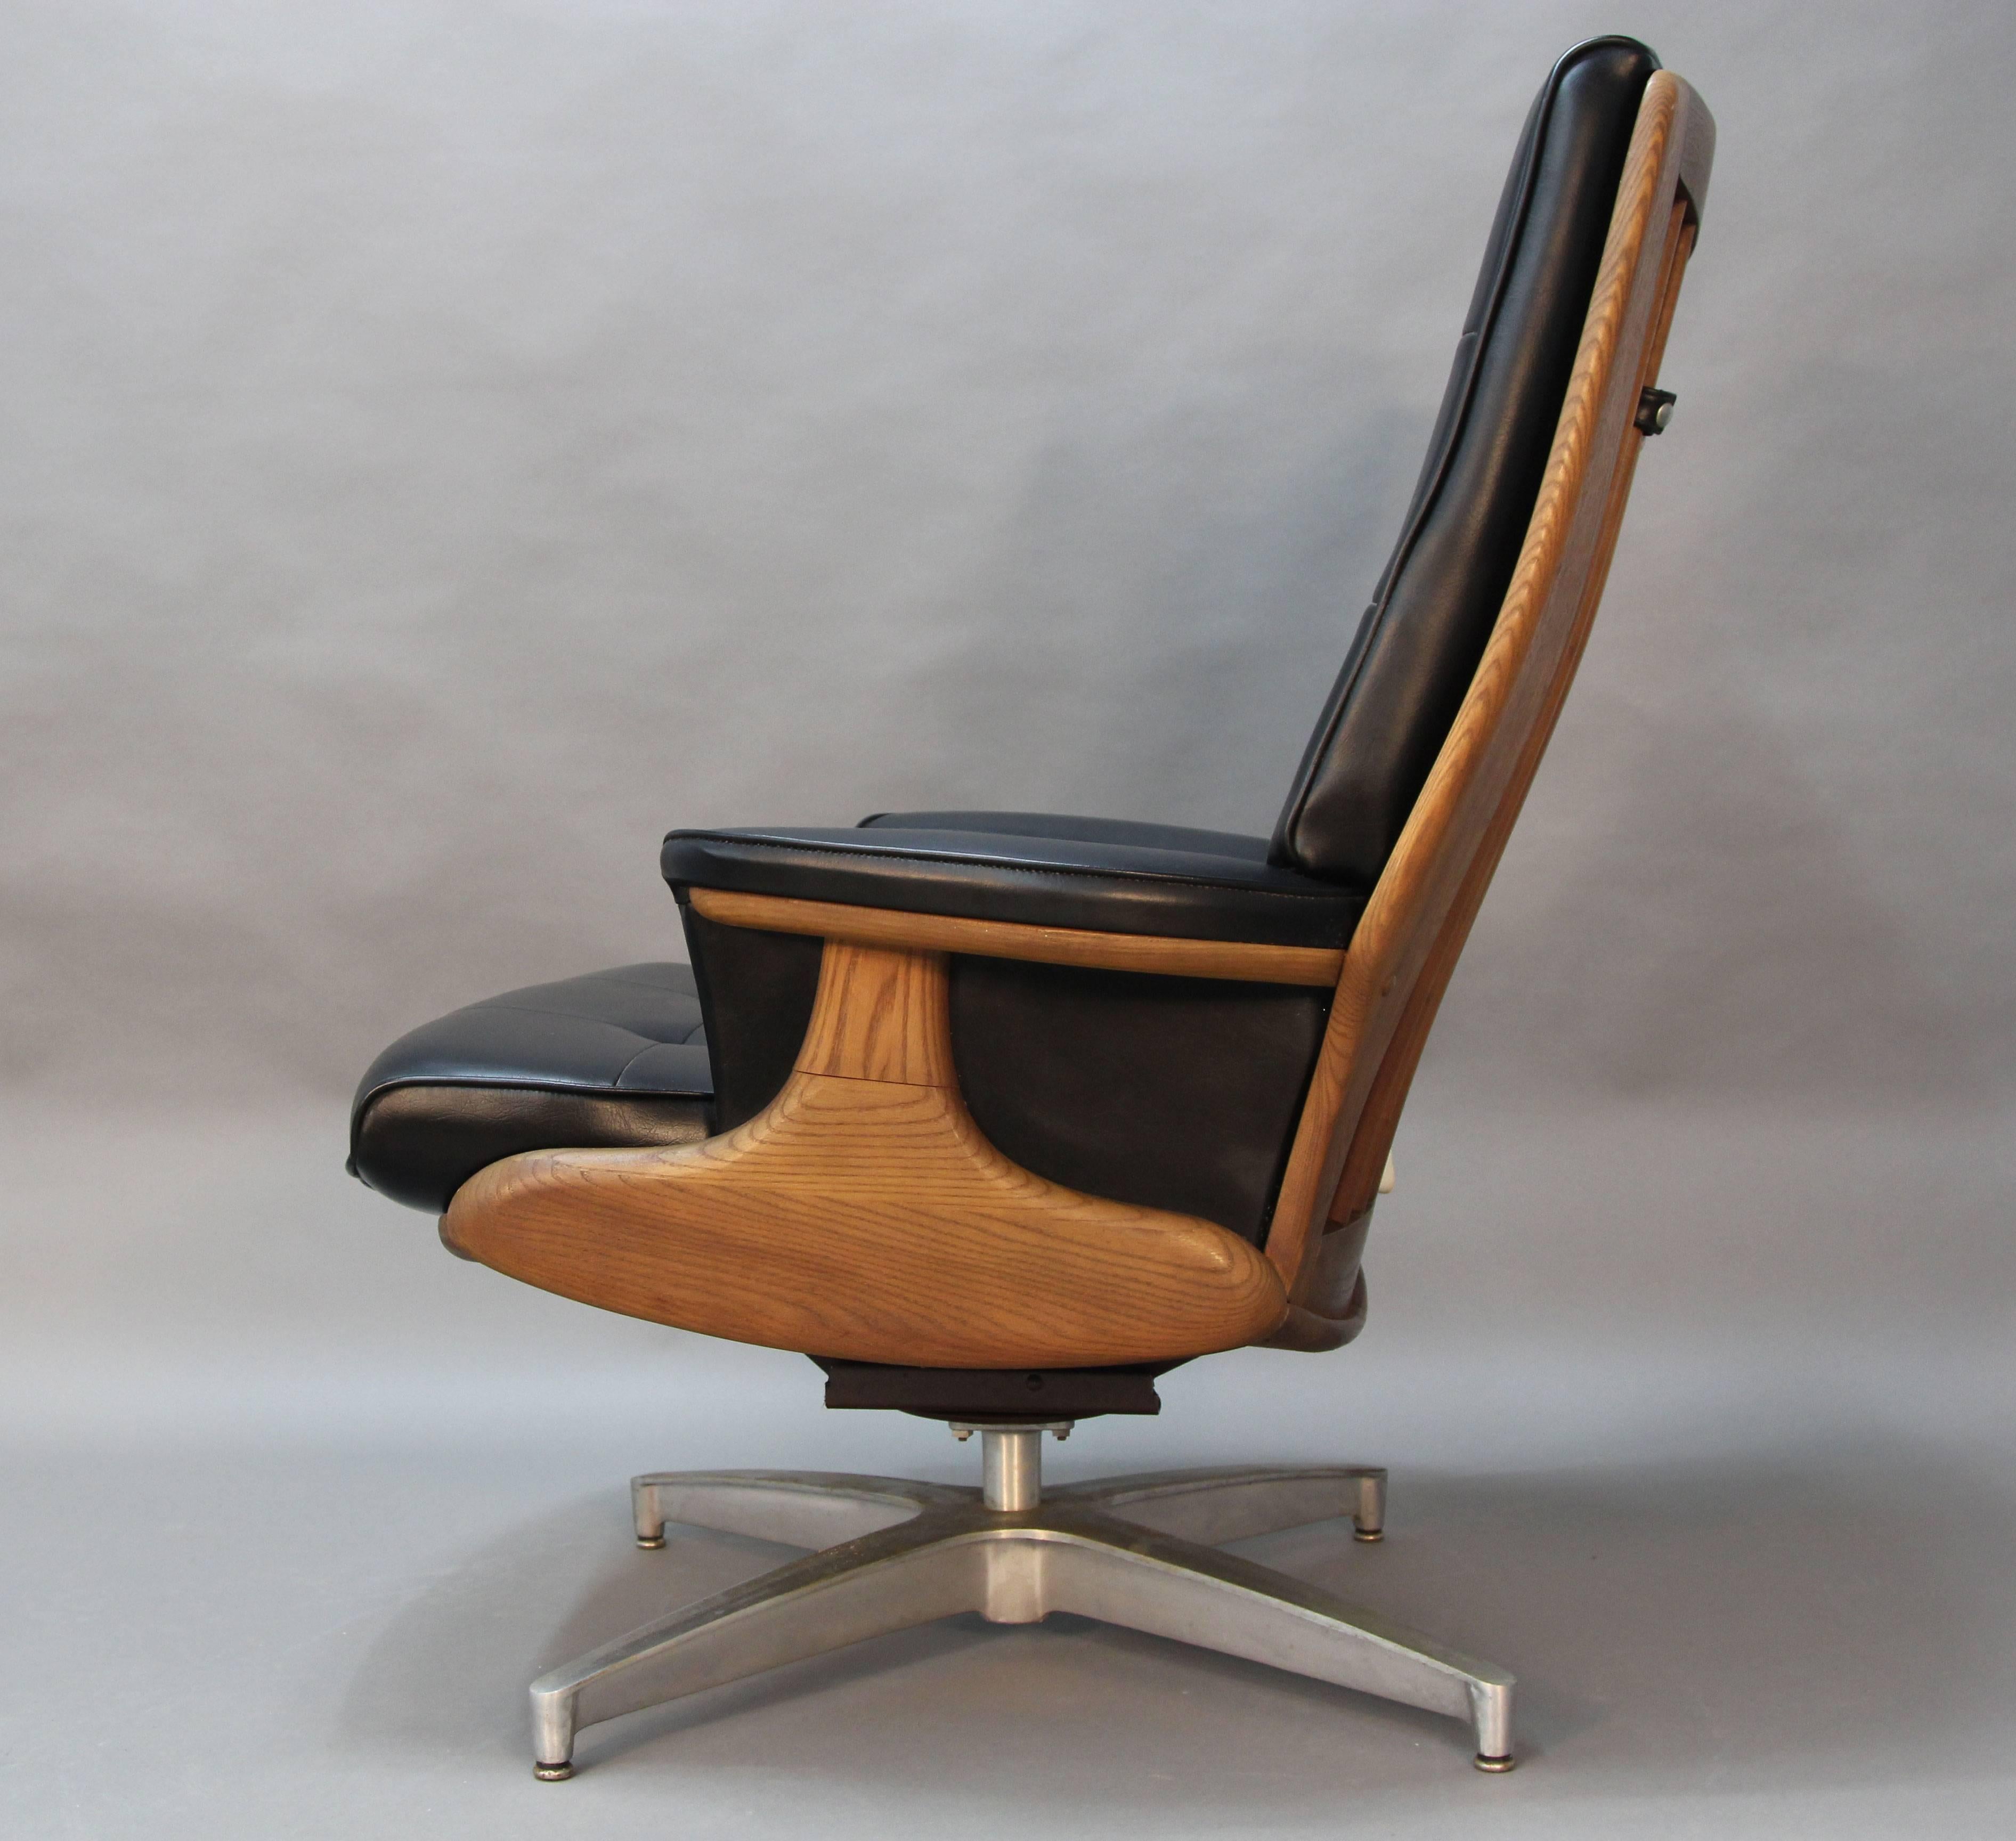 Excellent condition, Heywood-Wakefield Mid-Century lounge chair and ottoman. Wood frame on metal swivel base. Vinyl upholstery with box stitch and button tufting.